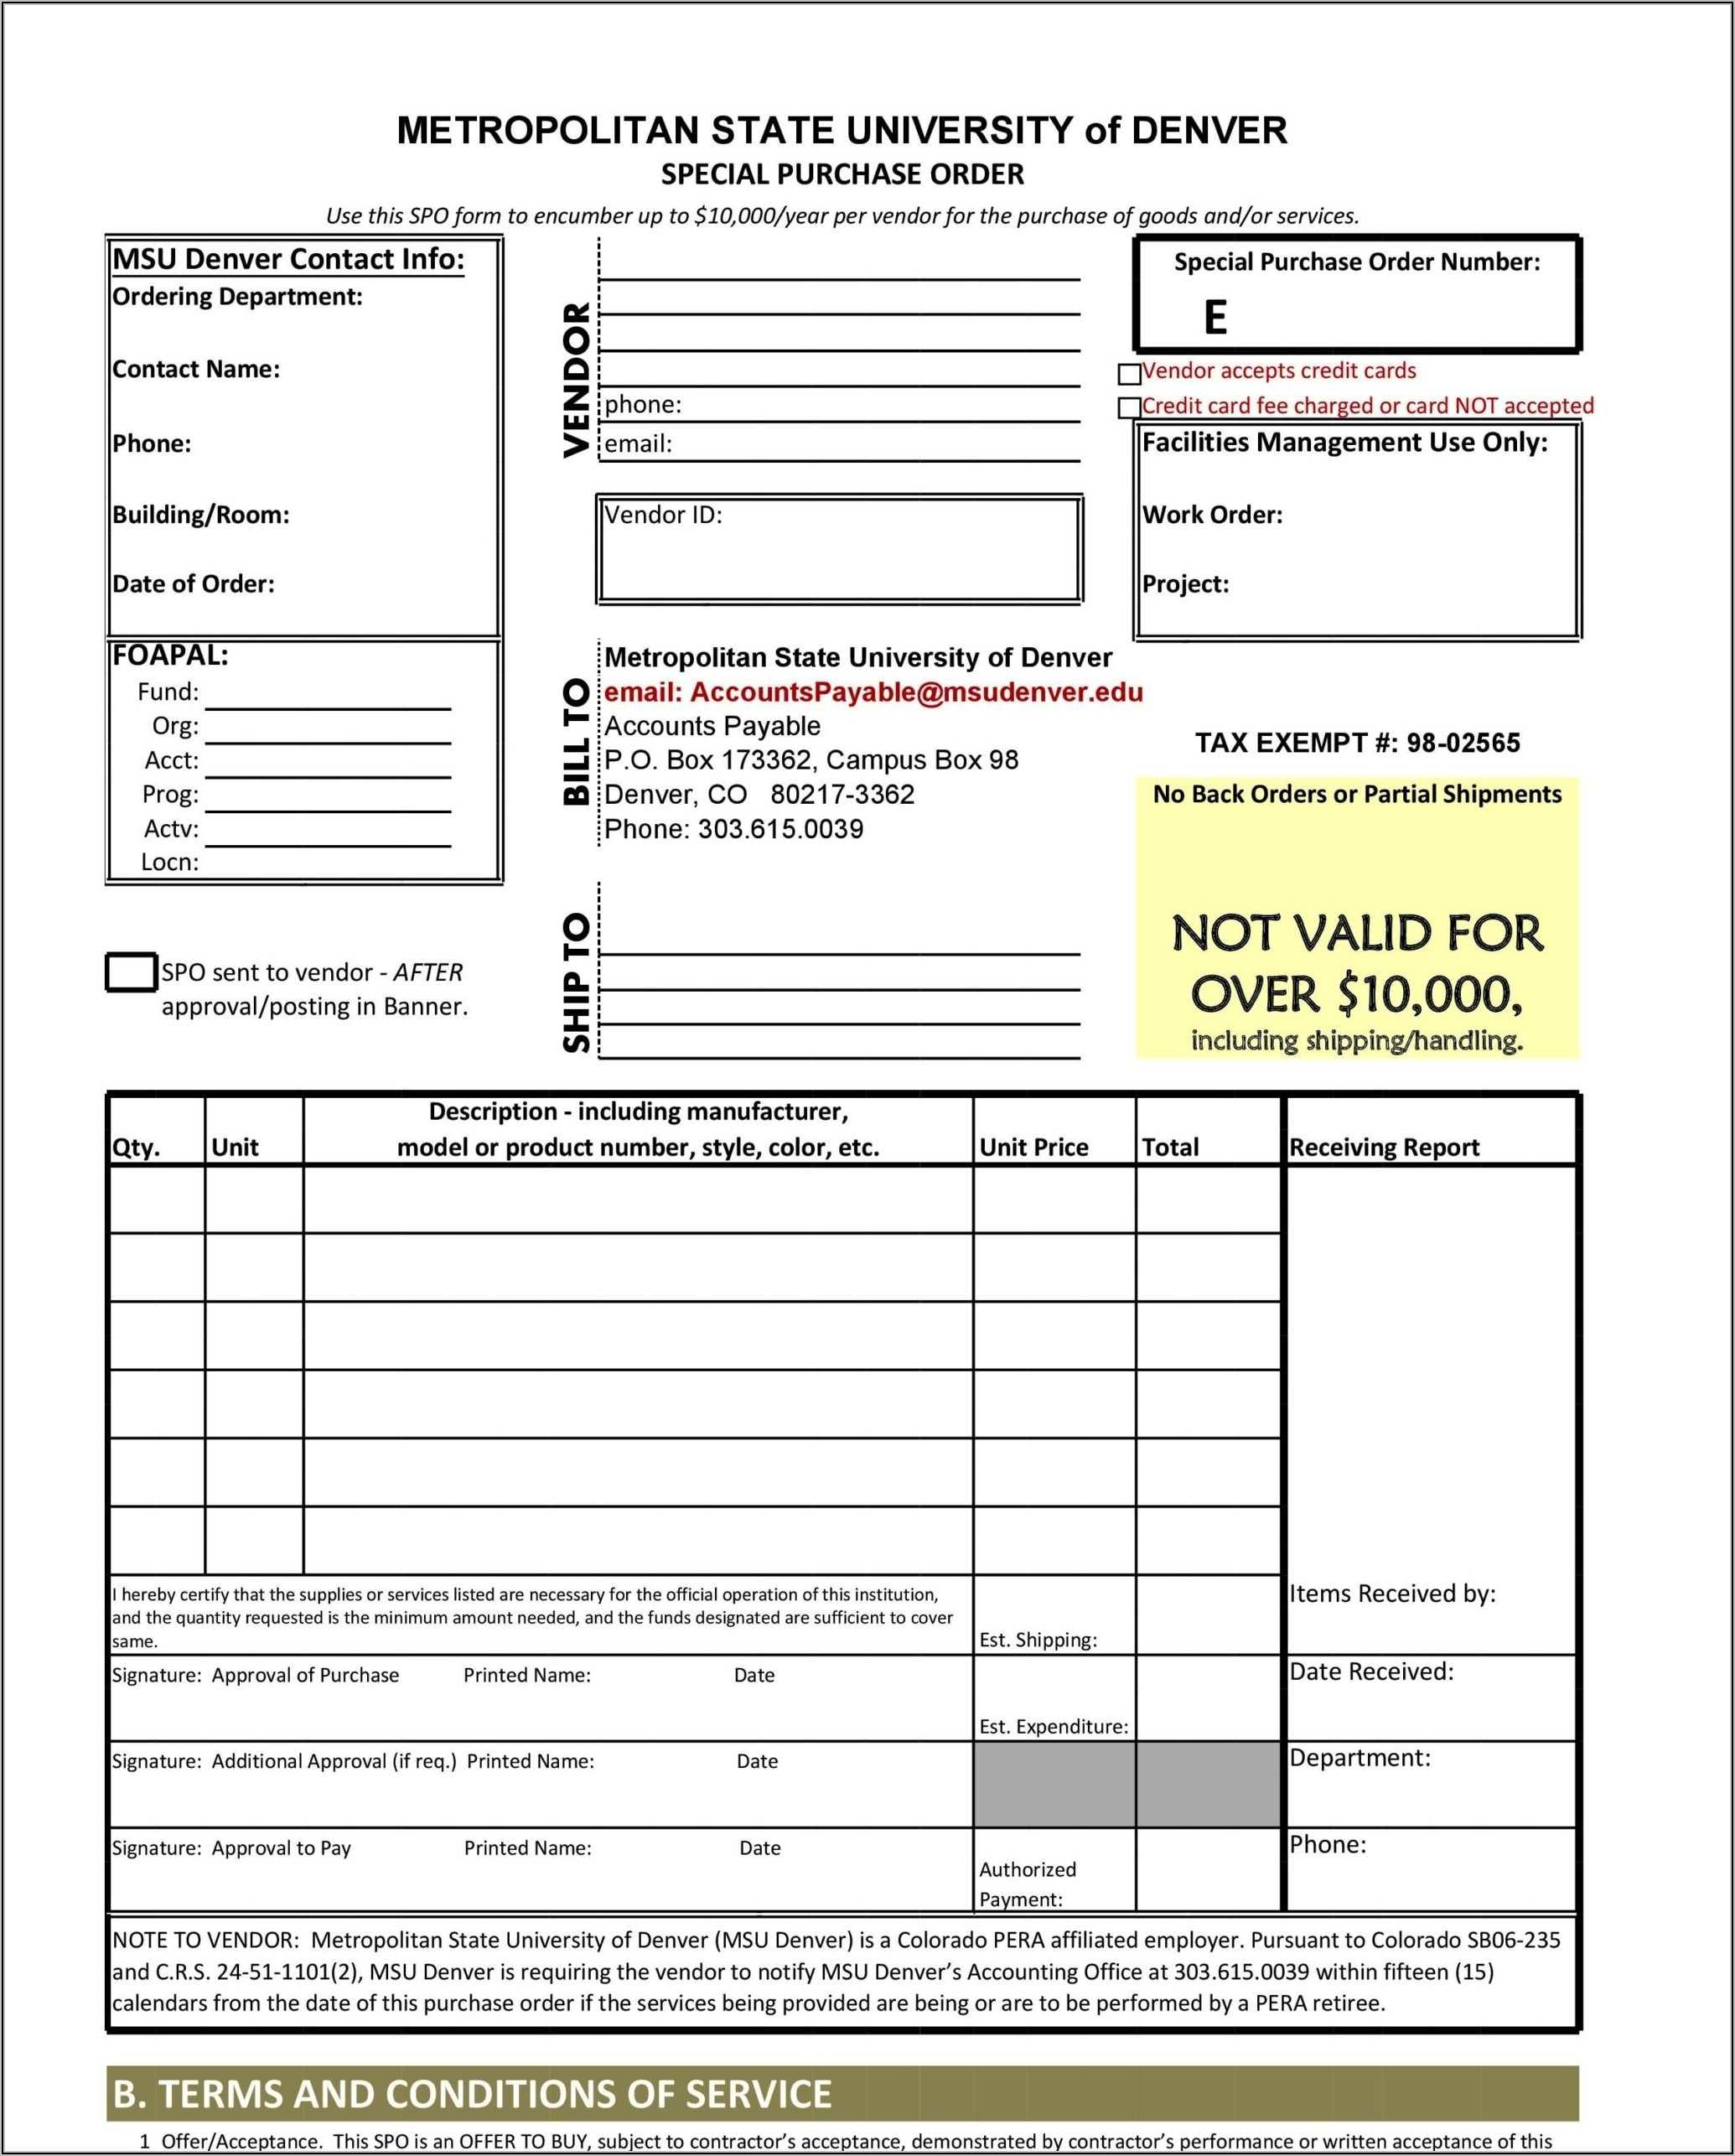 Standard Simple Purchase Order Terms And Conditions Sample